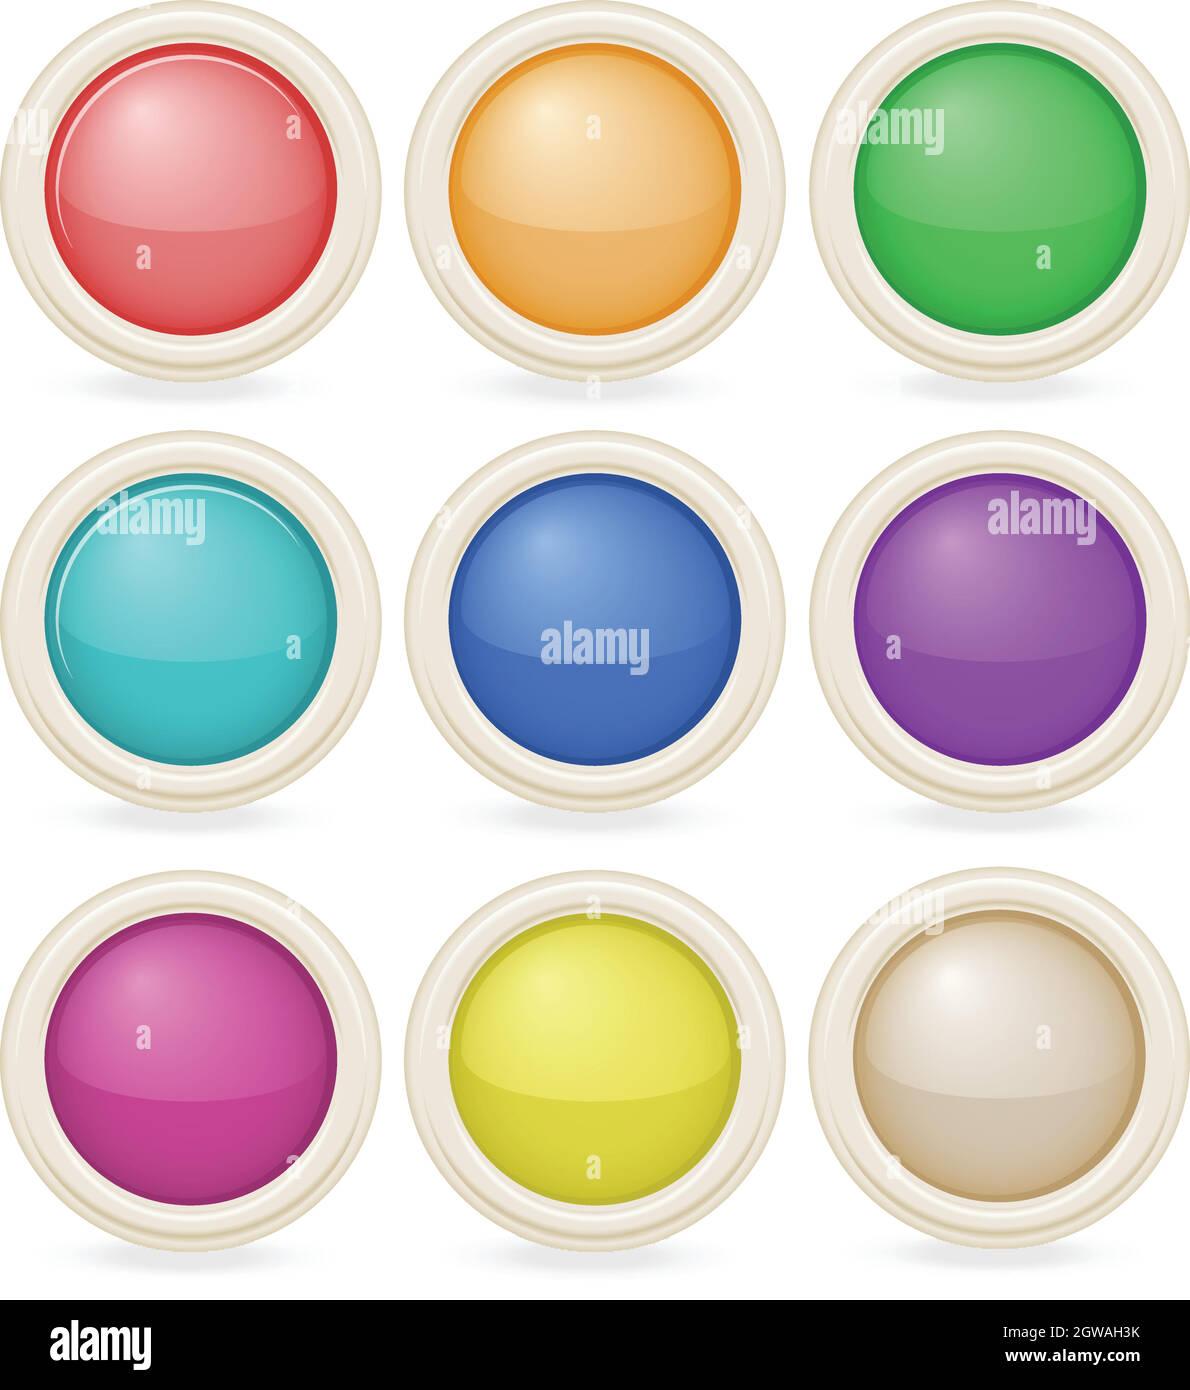 Colorful web design buttons Stock Vector